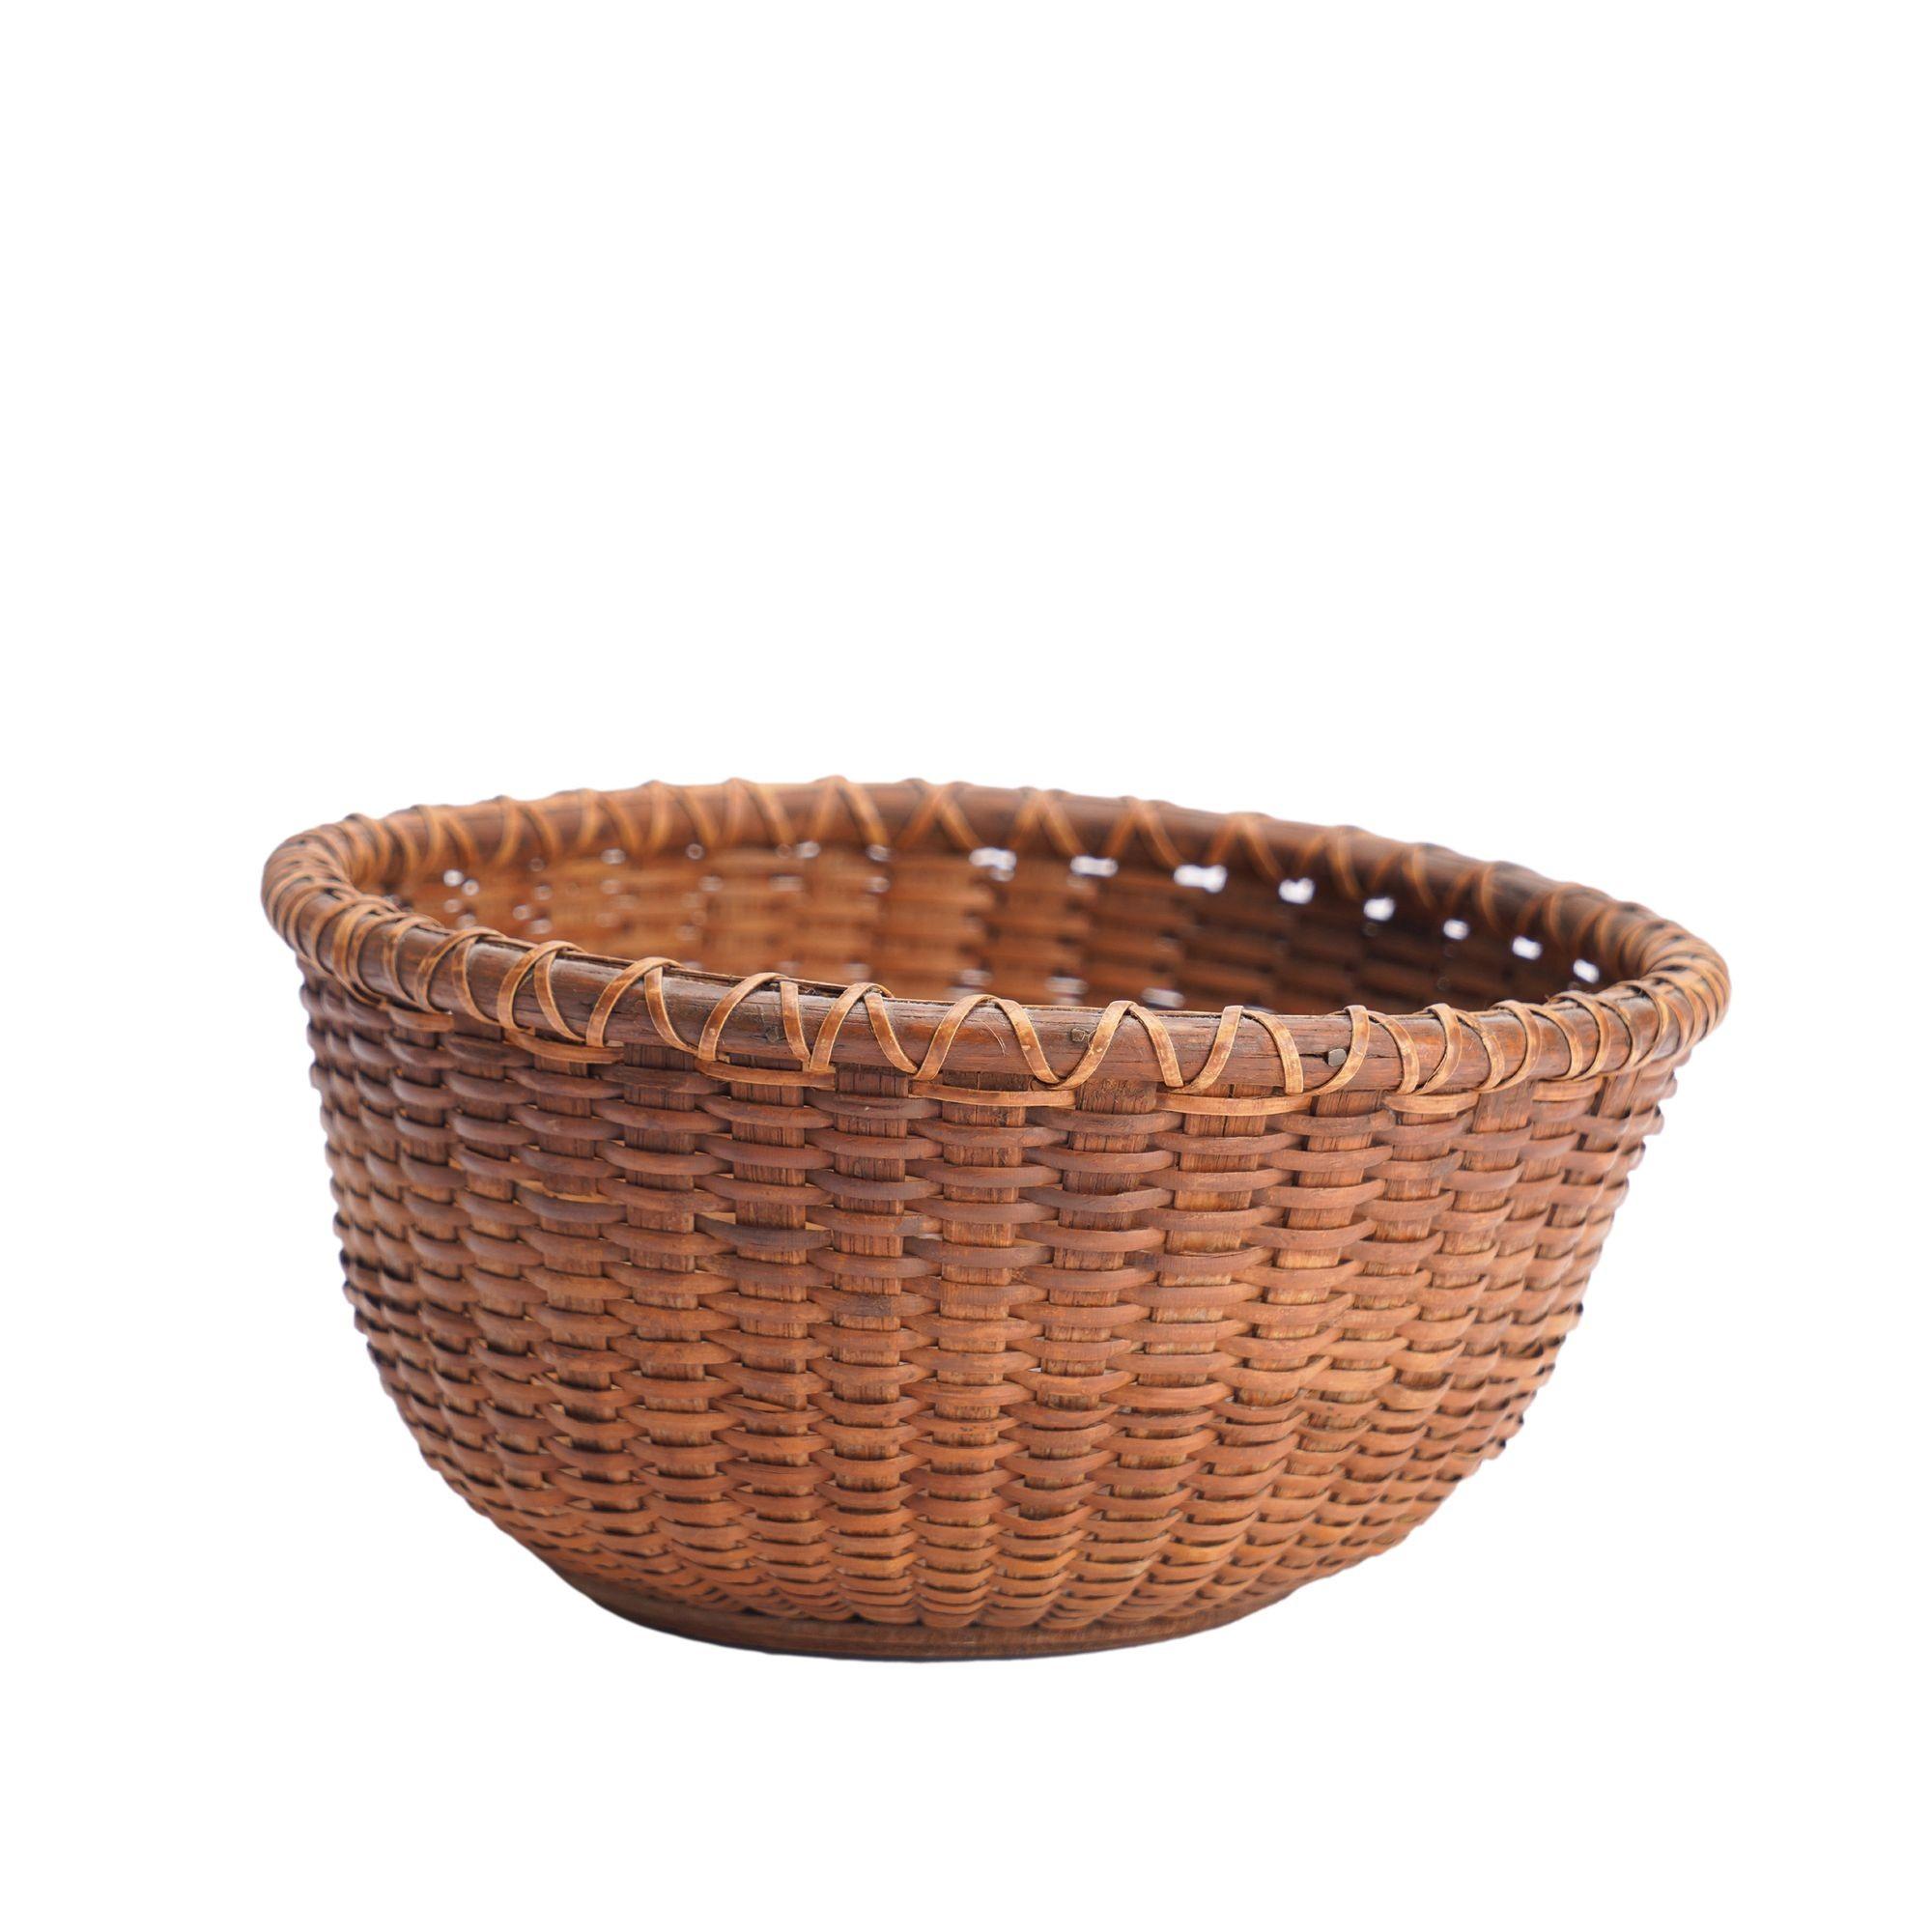 A classic vintage Nantucket berry basket with a turned hardwood base, scored with double incised circles. The base captures 41 curved ash stays woven together with split bamboo, and is captured by a split ash dowel at the rim, all of which is lashed